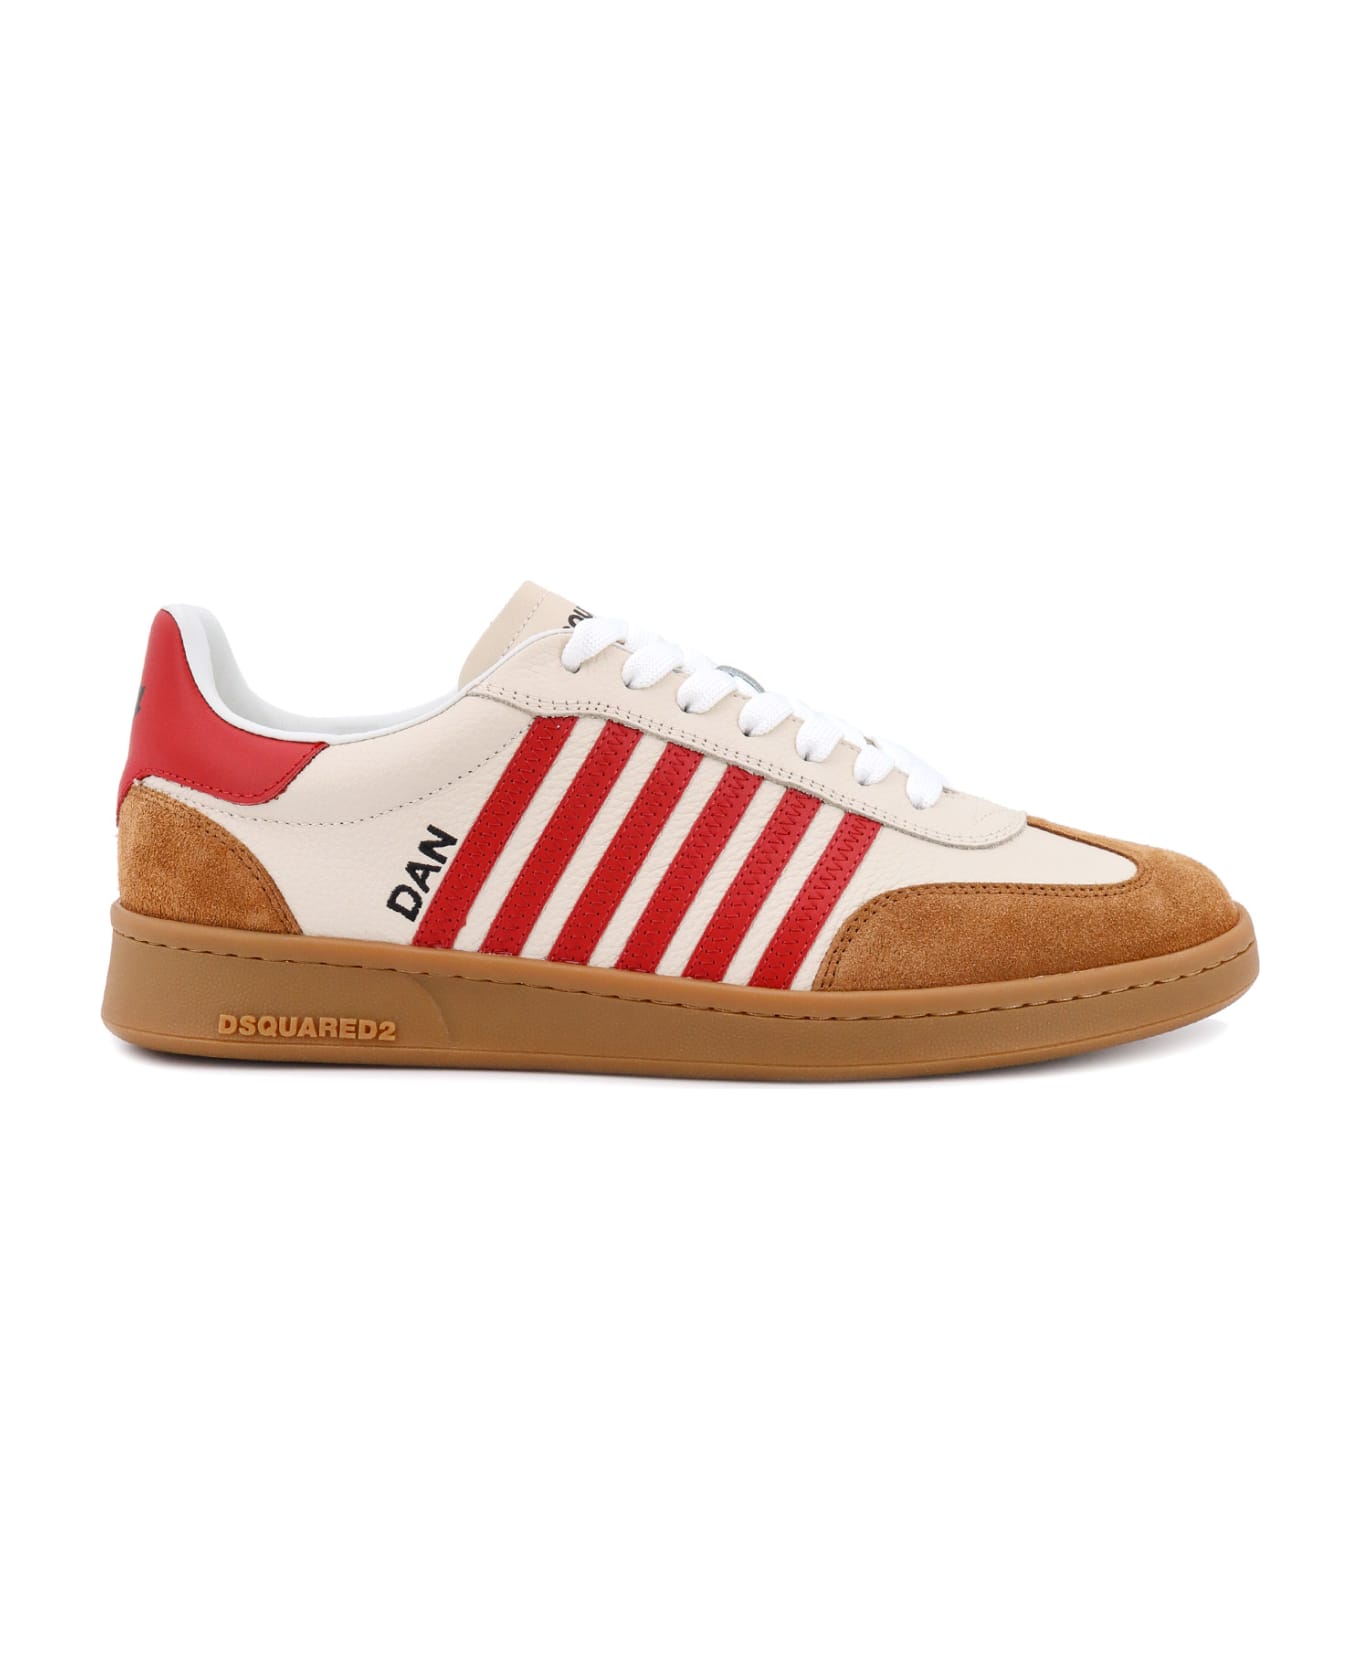 Dsquared2 Boxer Sneakers - Beige